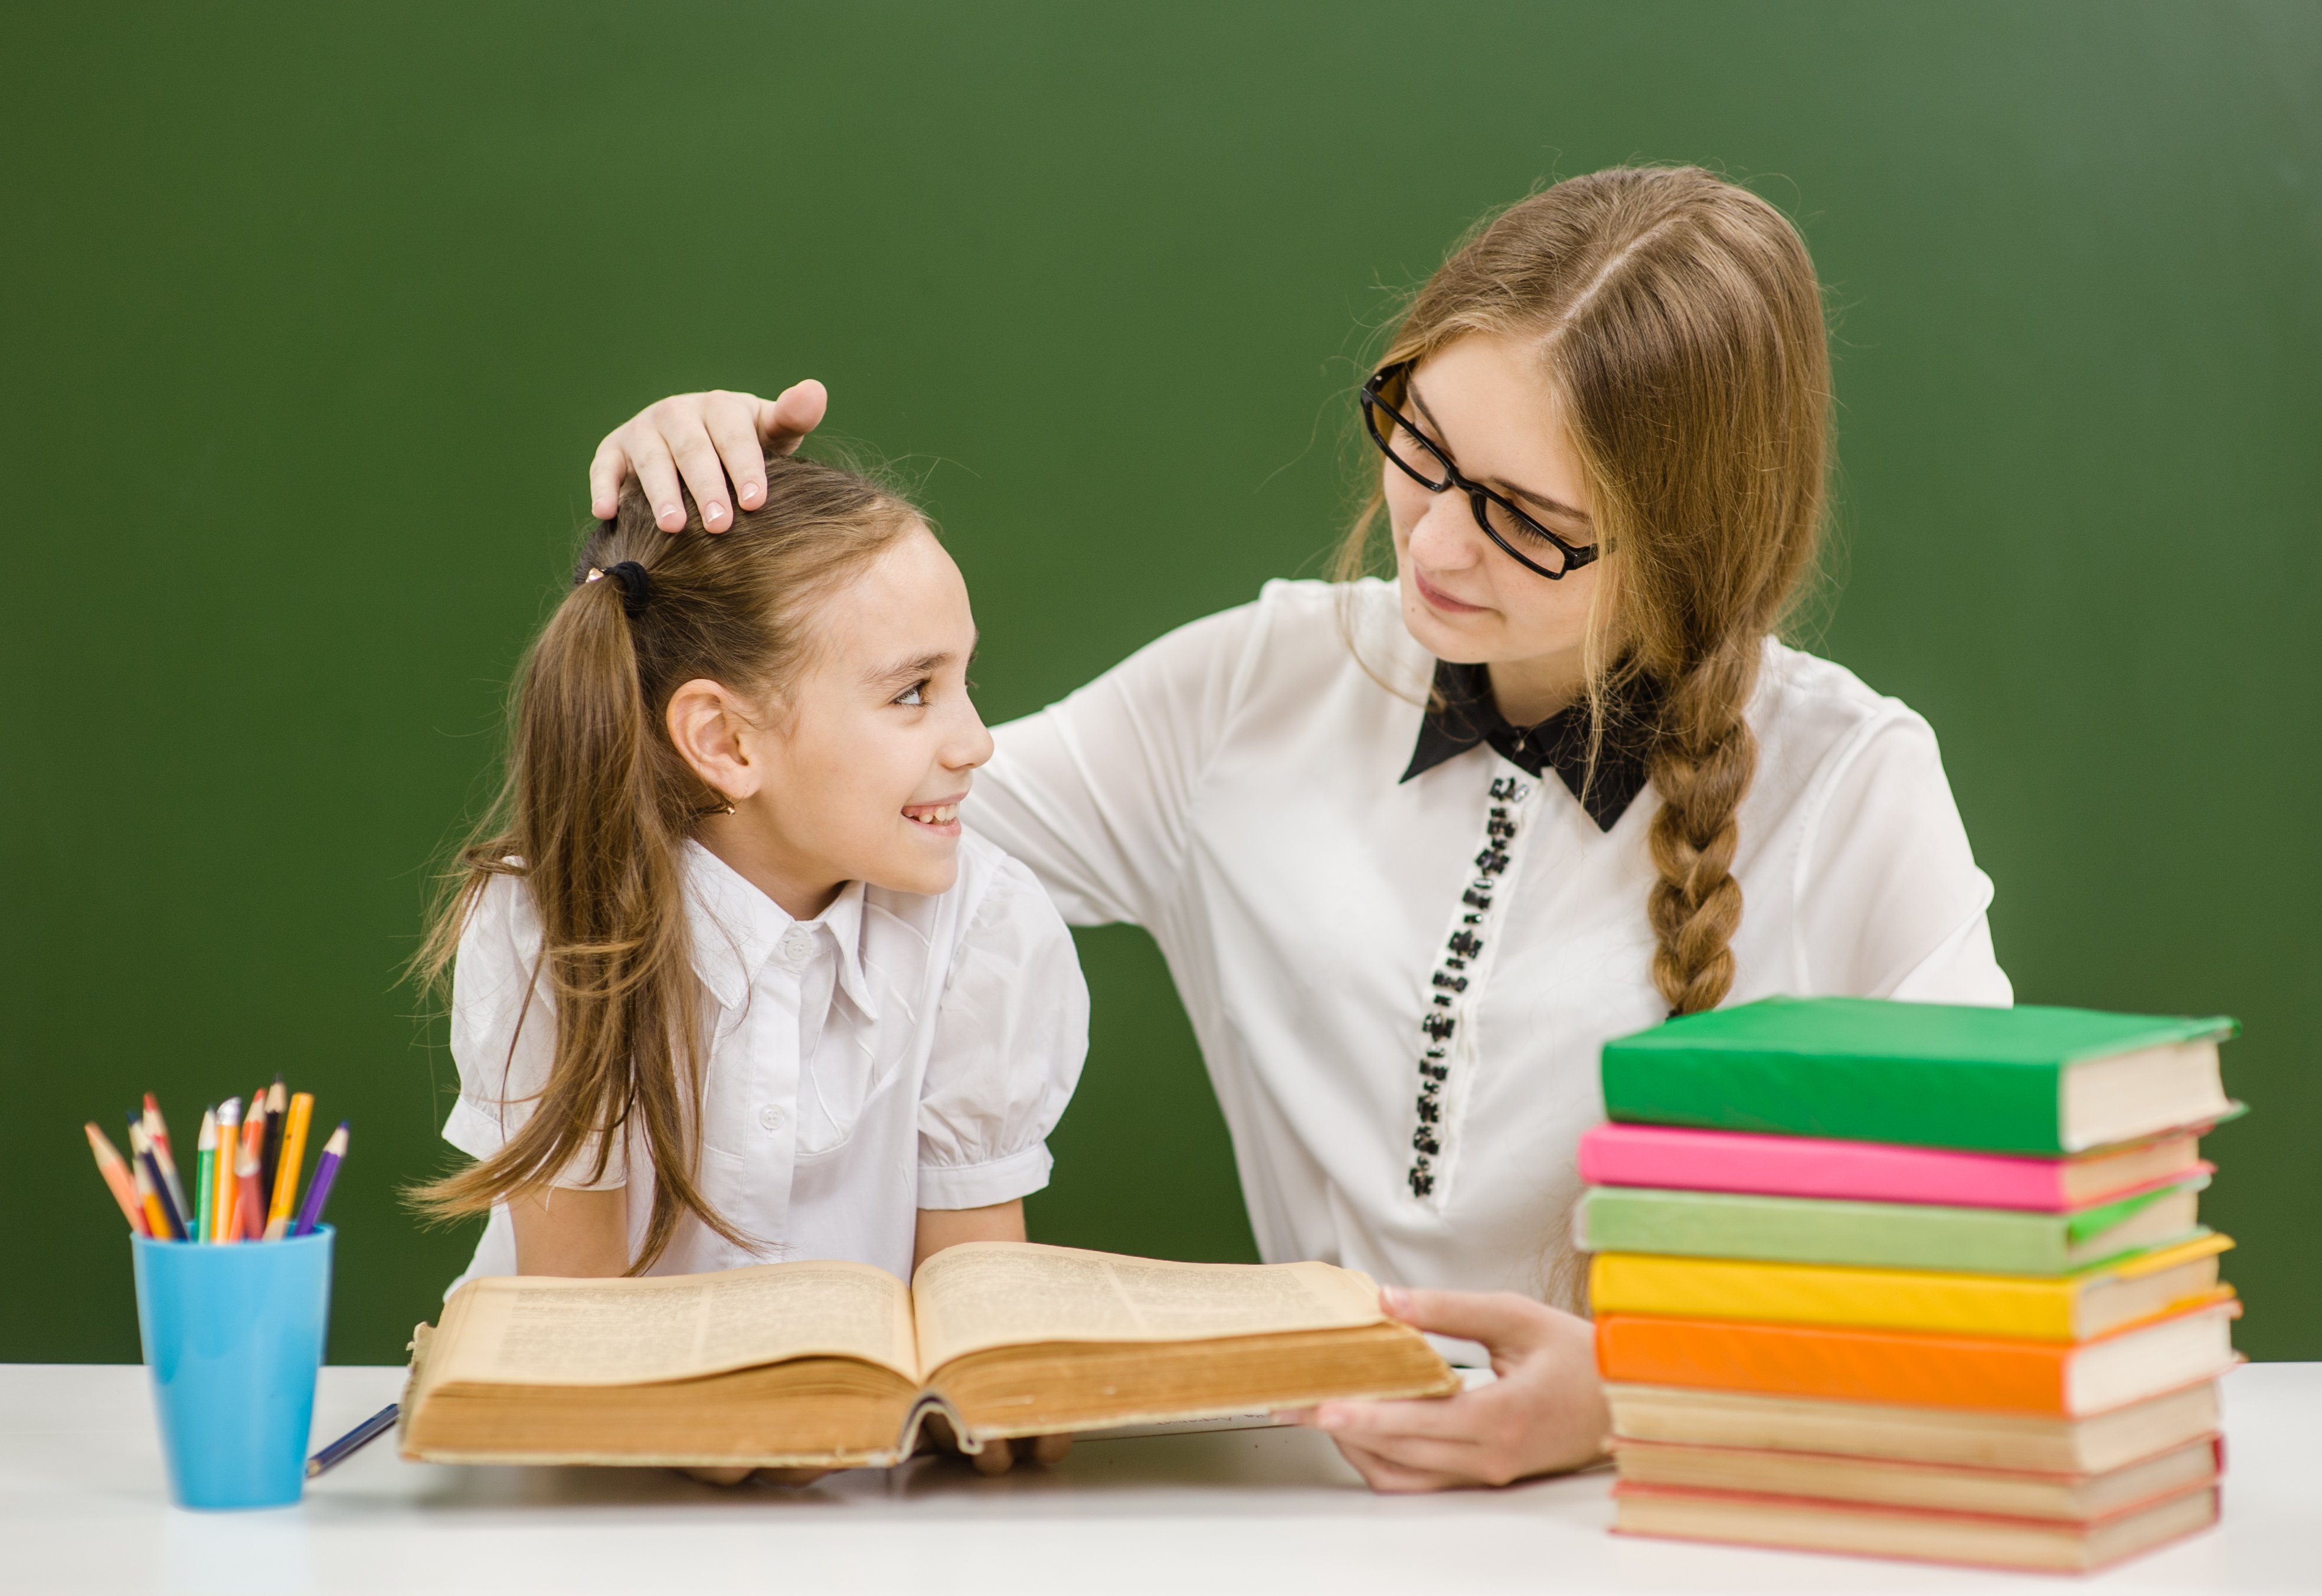 Teacher and student in classroom. | Photo: Shutterstock